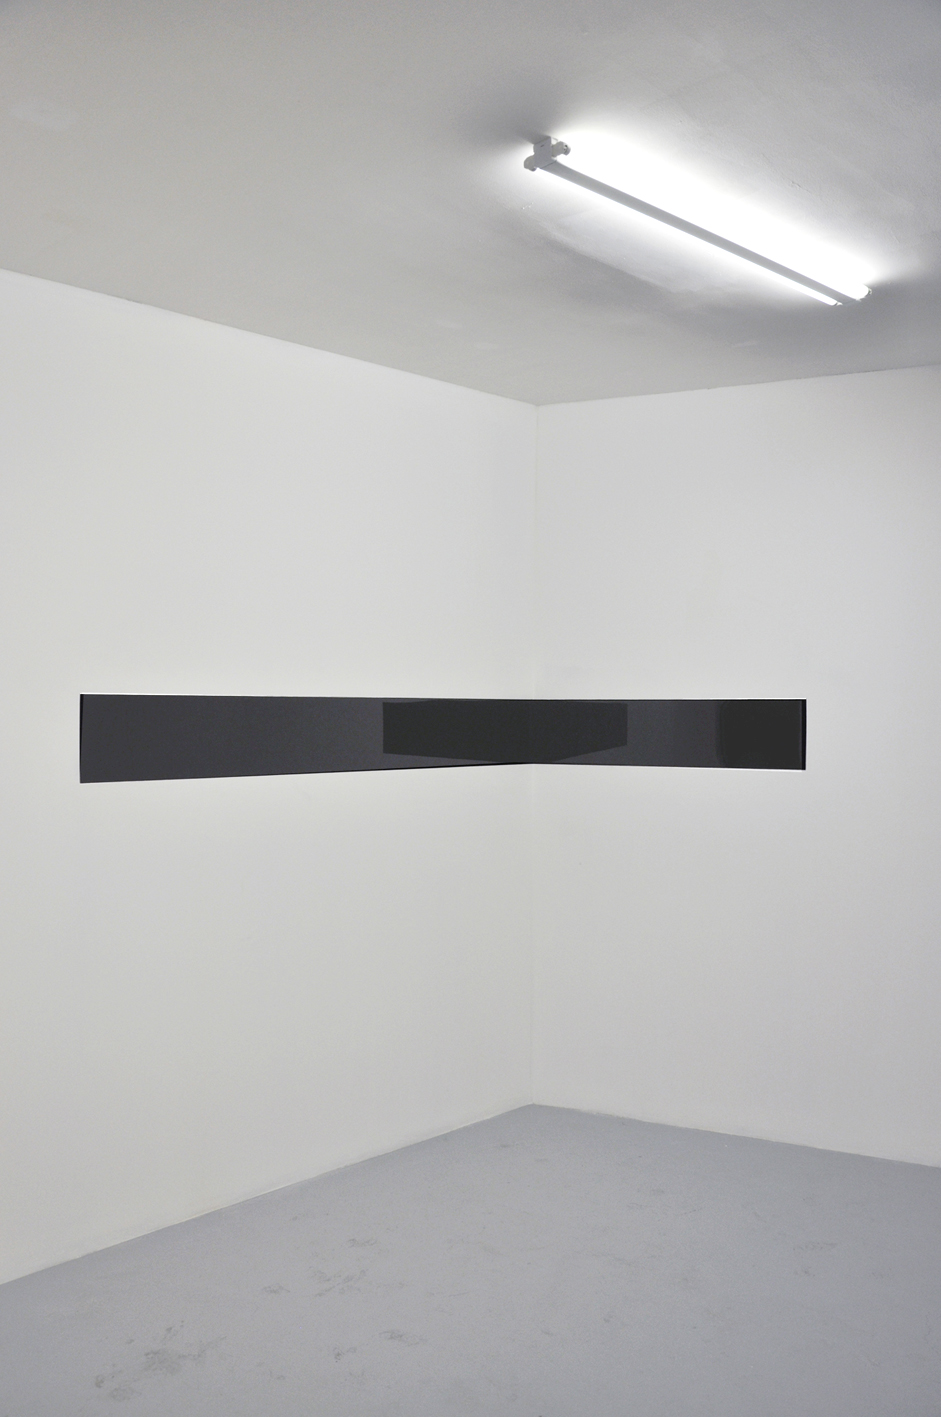   Site Related  Installation view Galerie Odile Ouizeman, Paris, 2012 